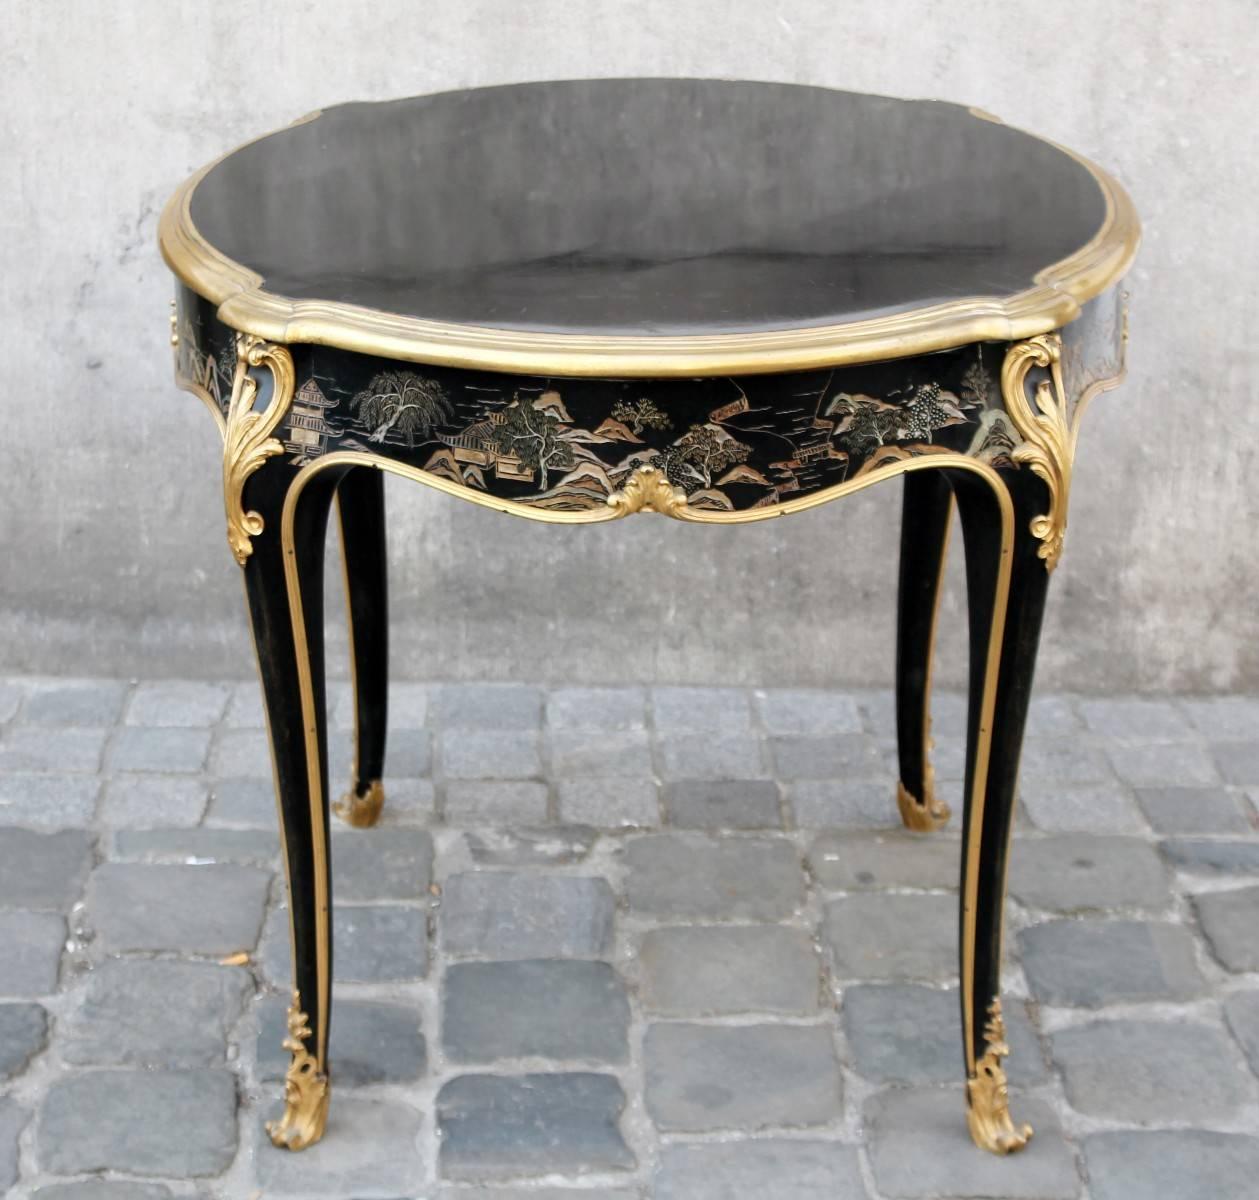 Chinese style stamped table, Rosel, Antwerp, circa 1900.

Mix between Chinese style and Louis XV. The general structure look like Louis XV with the curved feet and the brass to outline the structure. Chinese pattern and the black lacquered wood